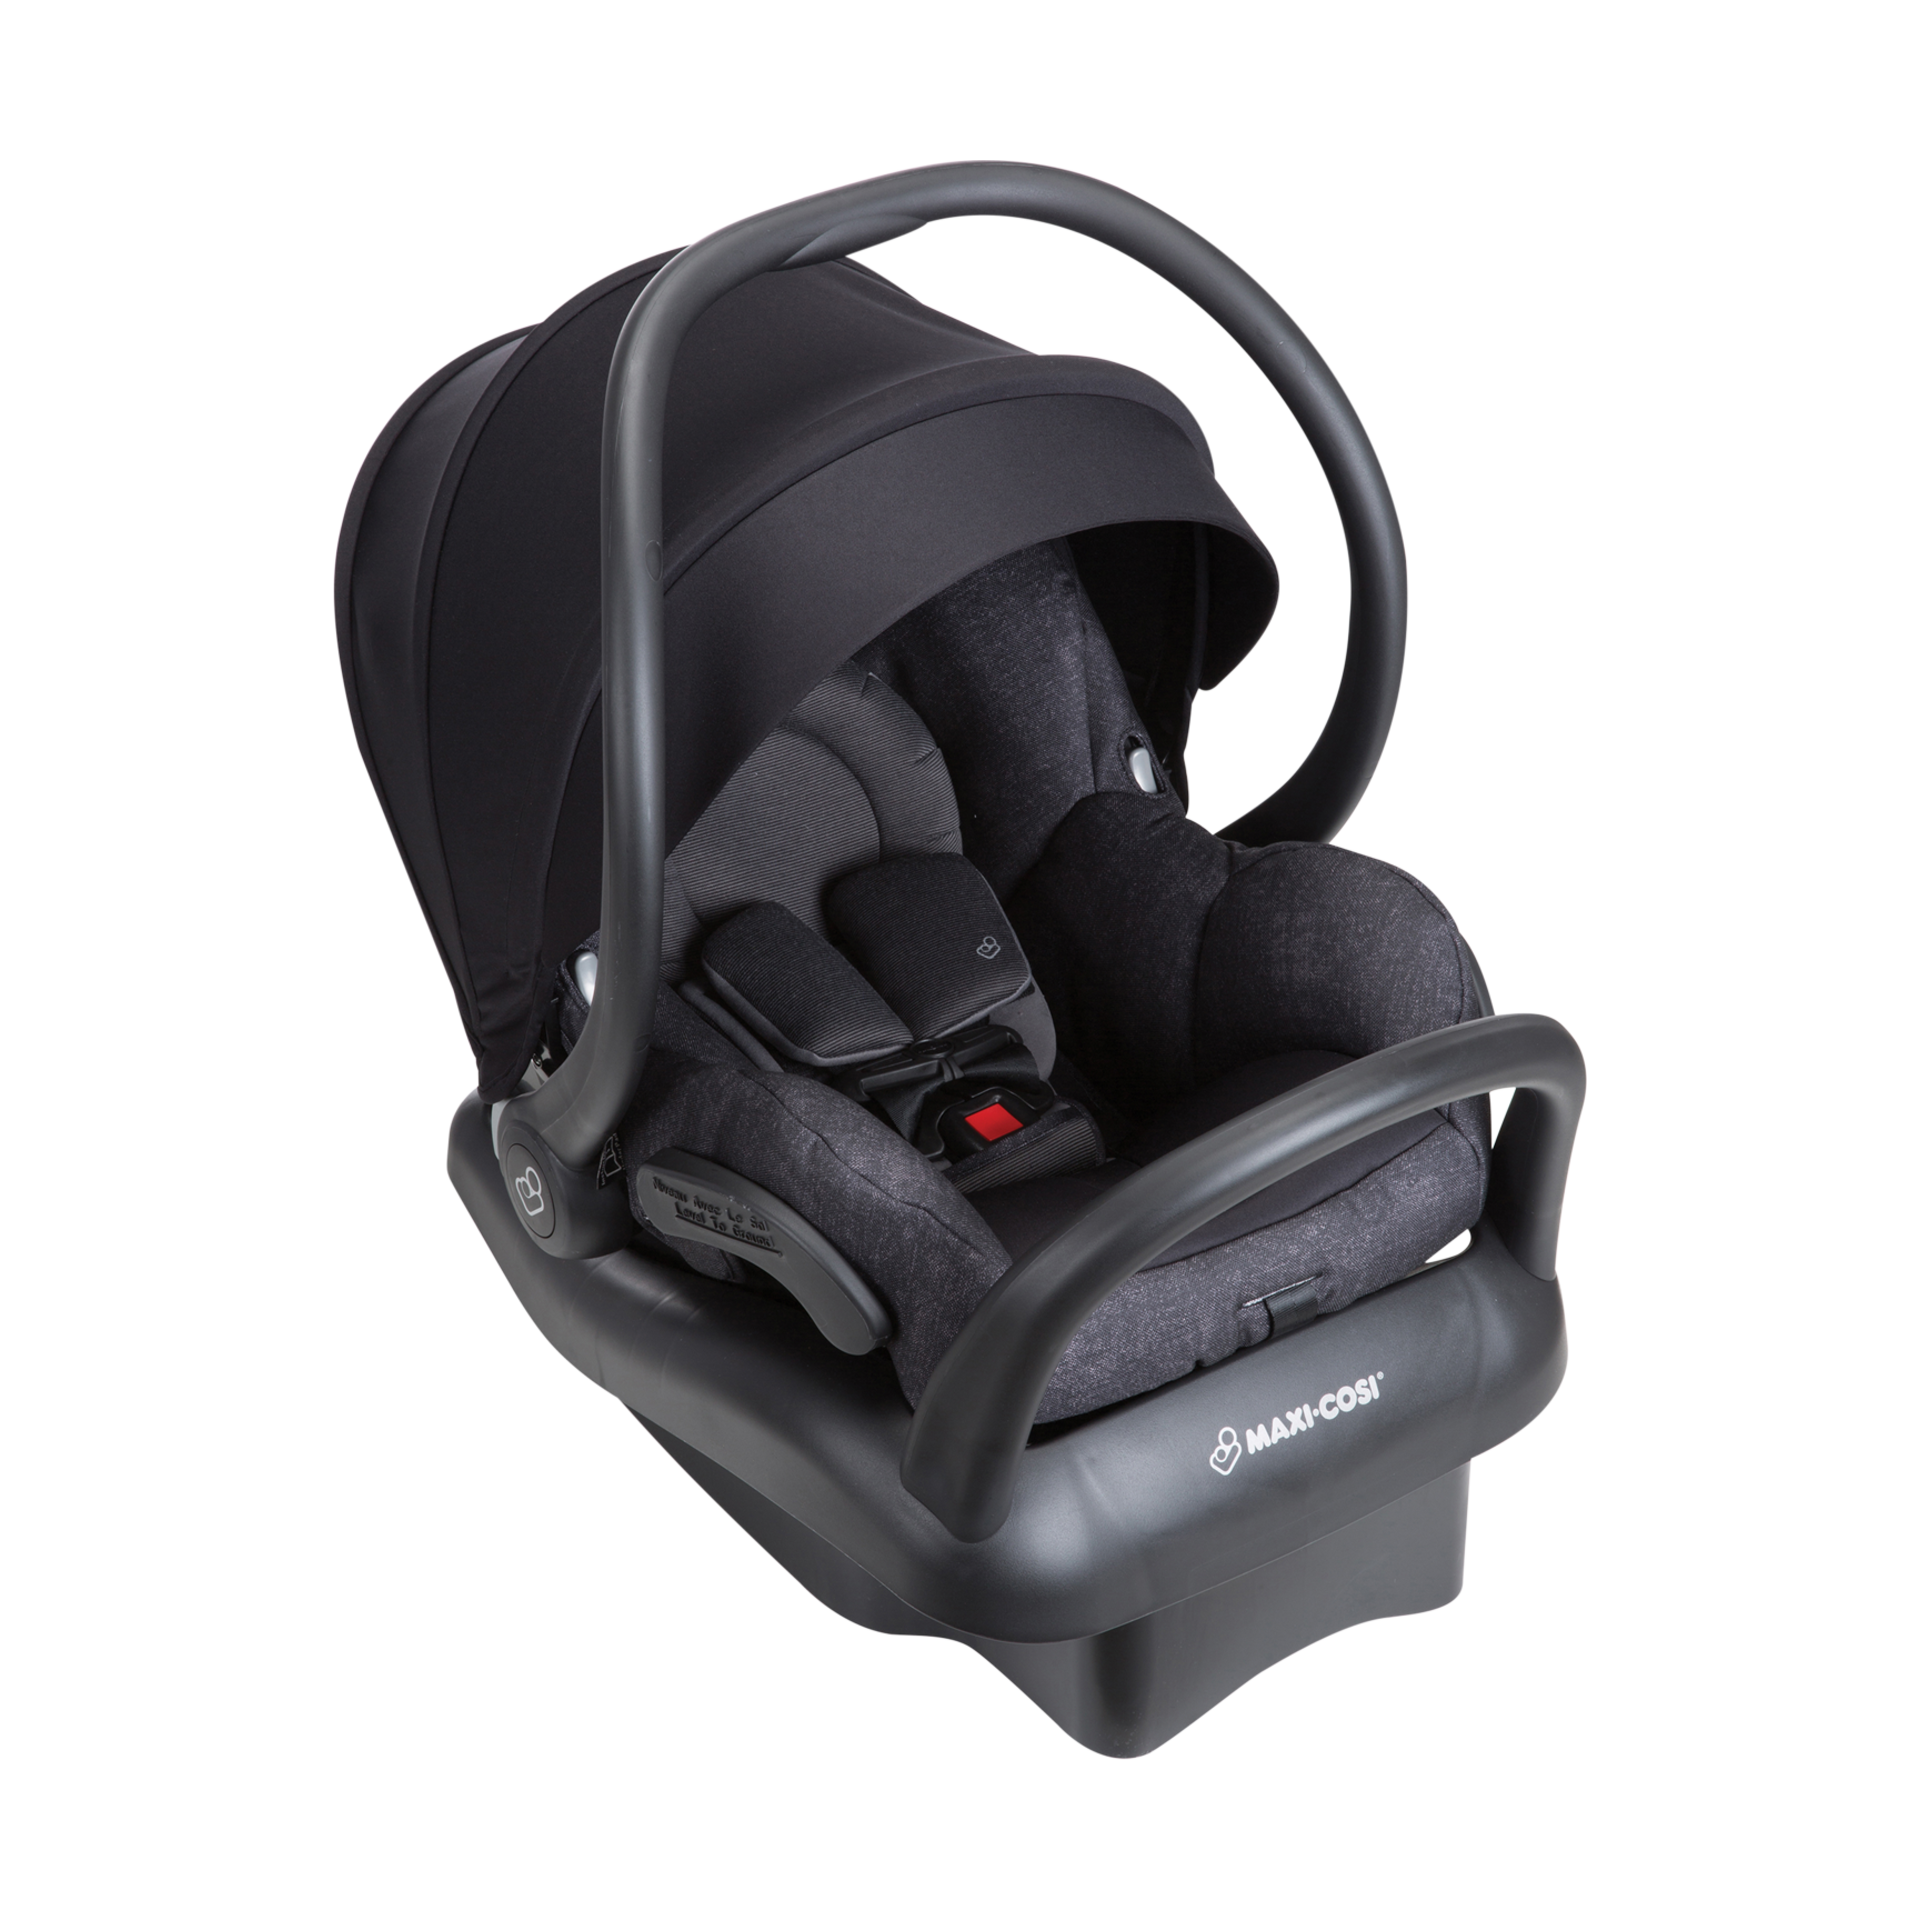 top rated car seat 2018